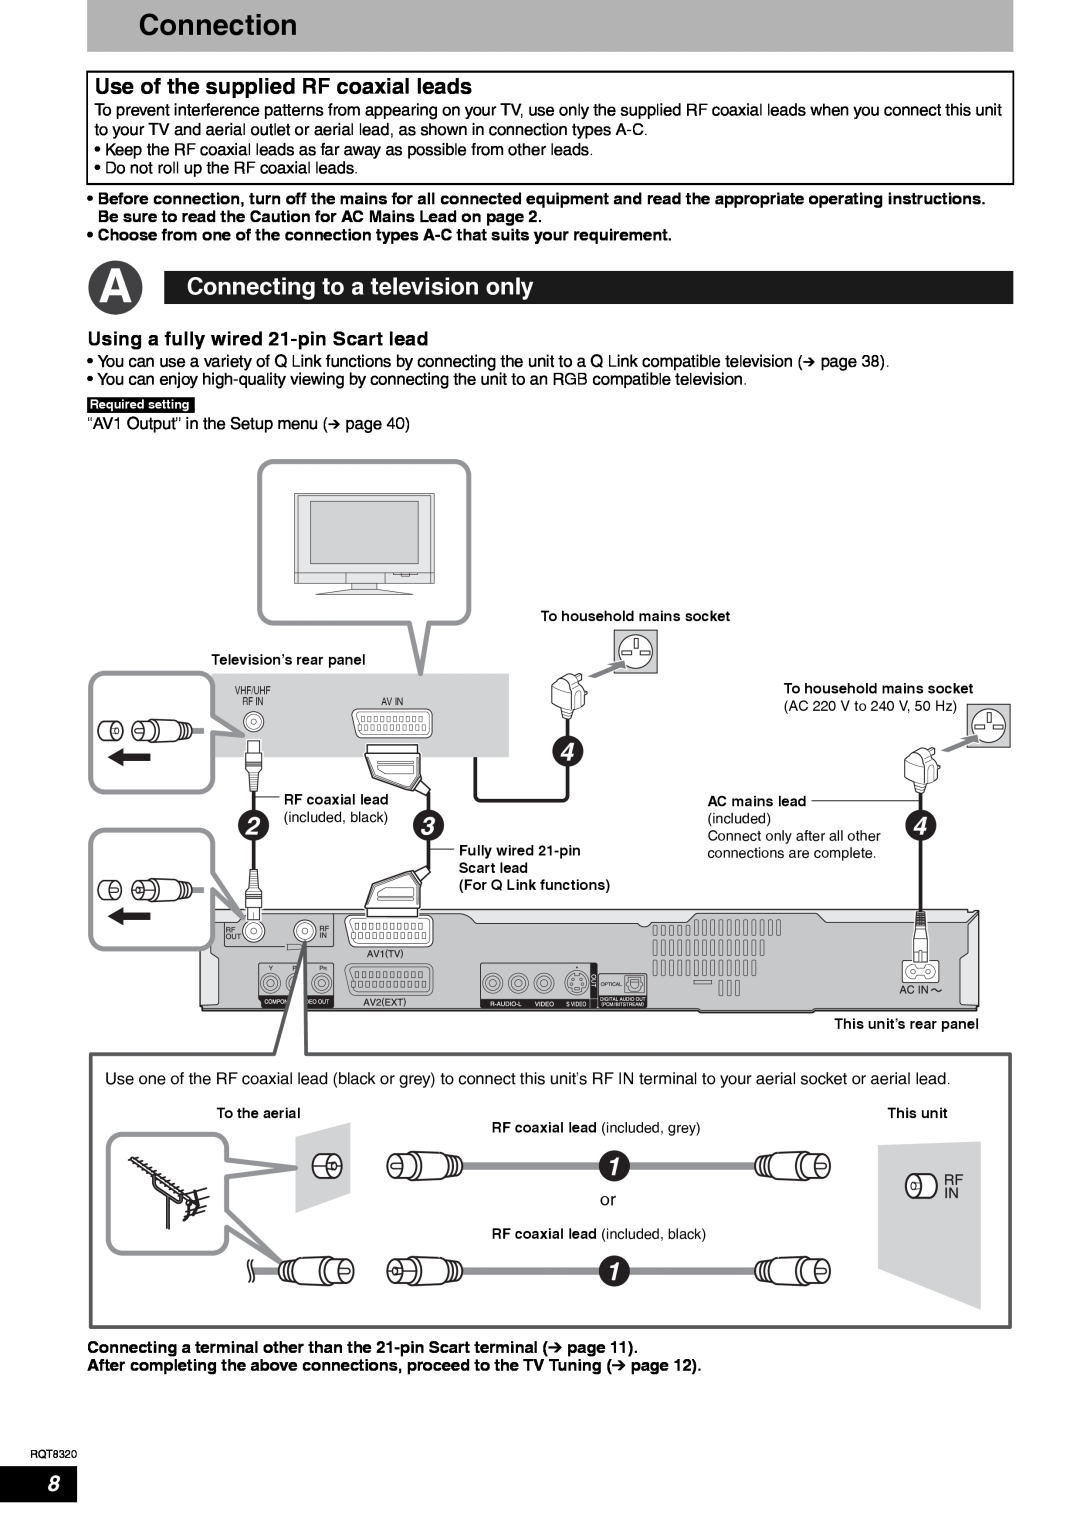 Panasonic DMR-ES15EB manual Connection, Connecting to a television only, Use of the supplied RF coaxial leads 